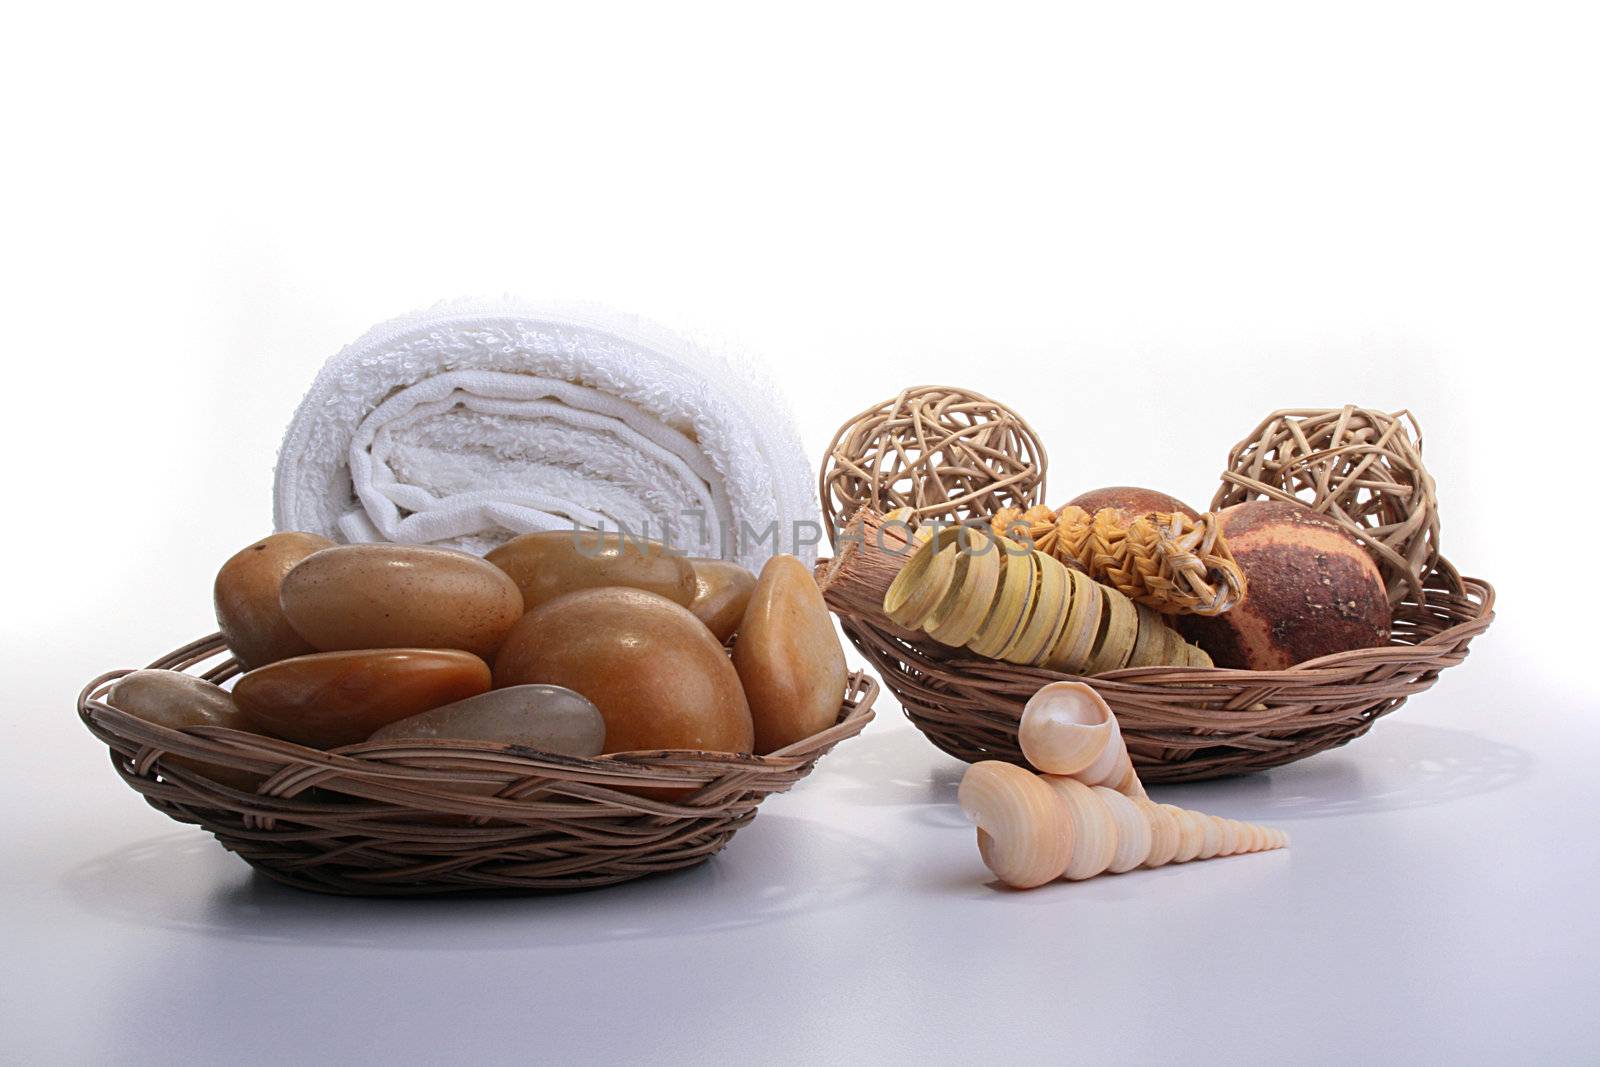 Set for SPA with towels, sea stones and other accessories.